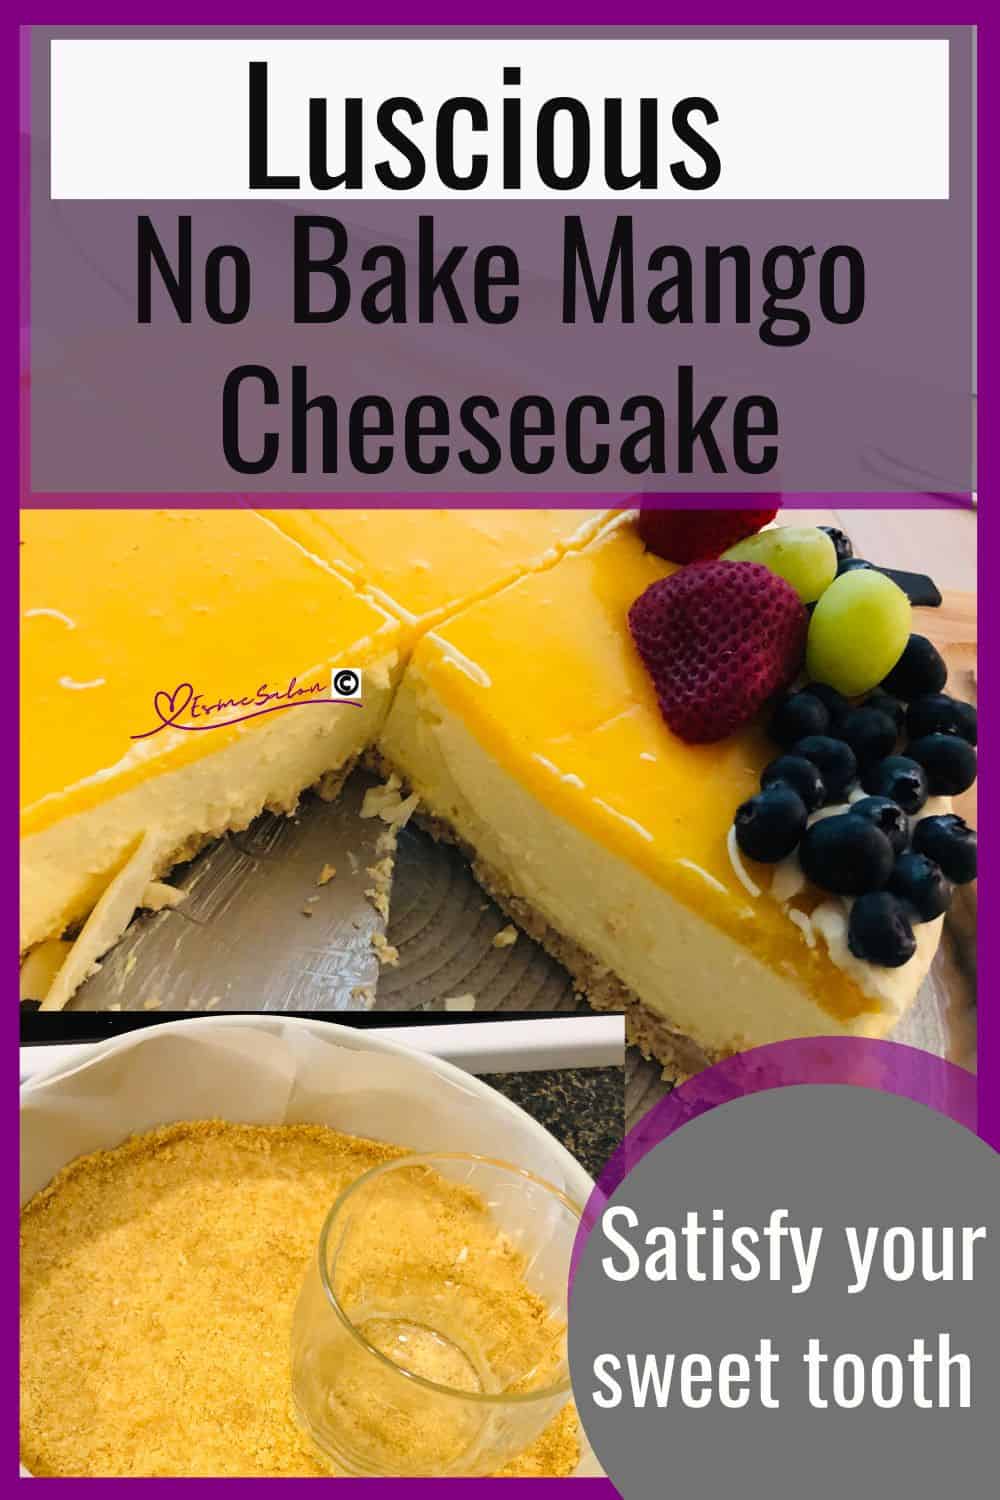 an image of a 9" No Bake Mango Cheesecake with berries, grapes and strawberry topping